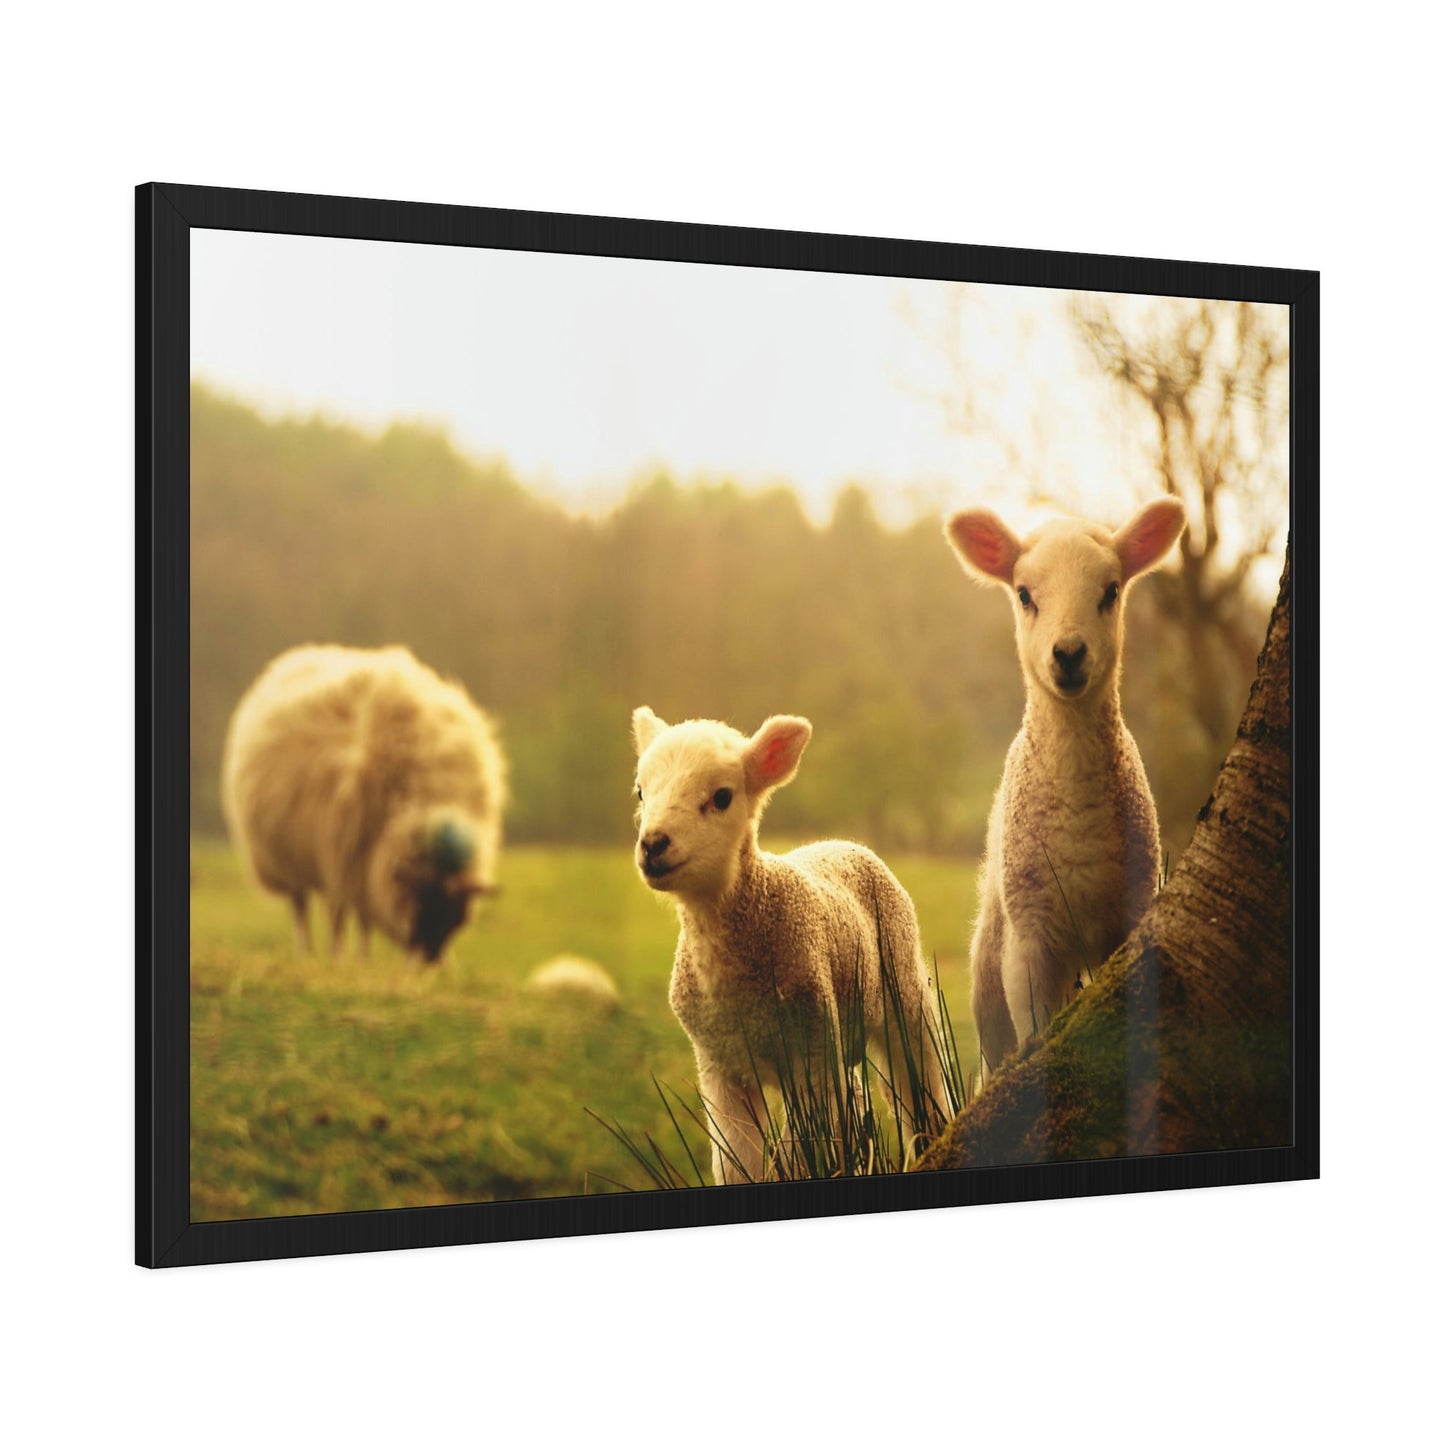 Rustic Charm: Framed Poster & Canvas of Sheep Grazing